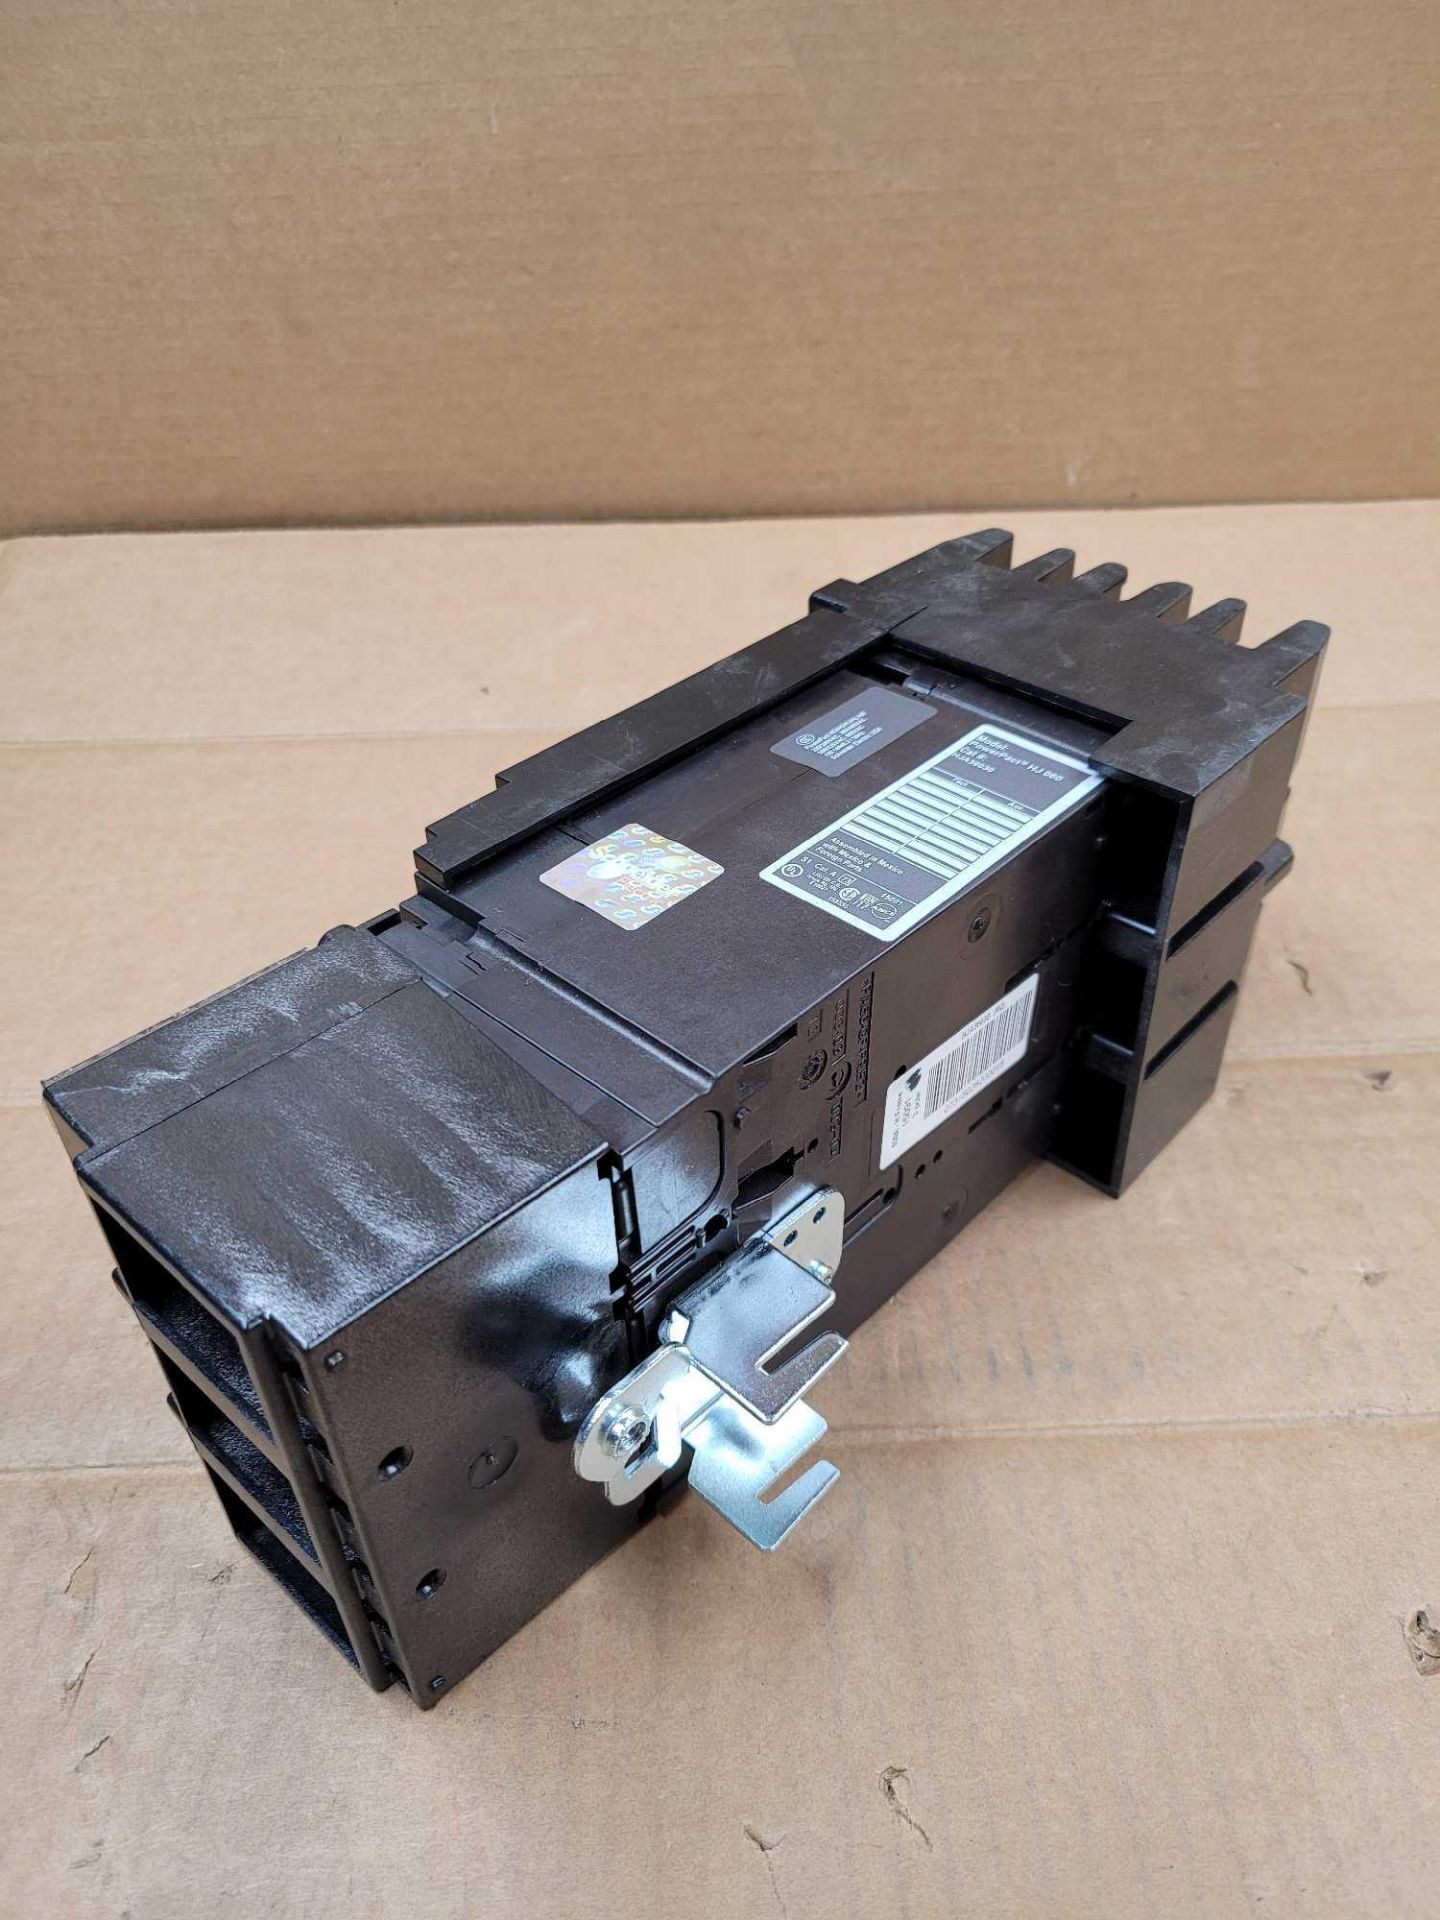 LOT OF 2 SQUARE D HJA36030 / 30 Amp Molded Case Circuit Breaker  /  Lot Weight: 9.8 lbs - Image 3 of 6